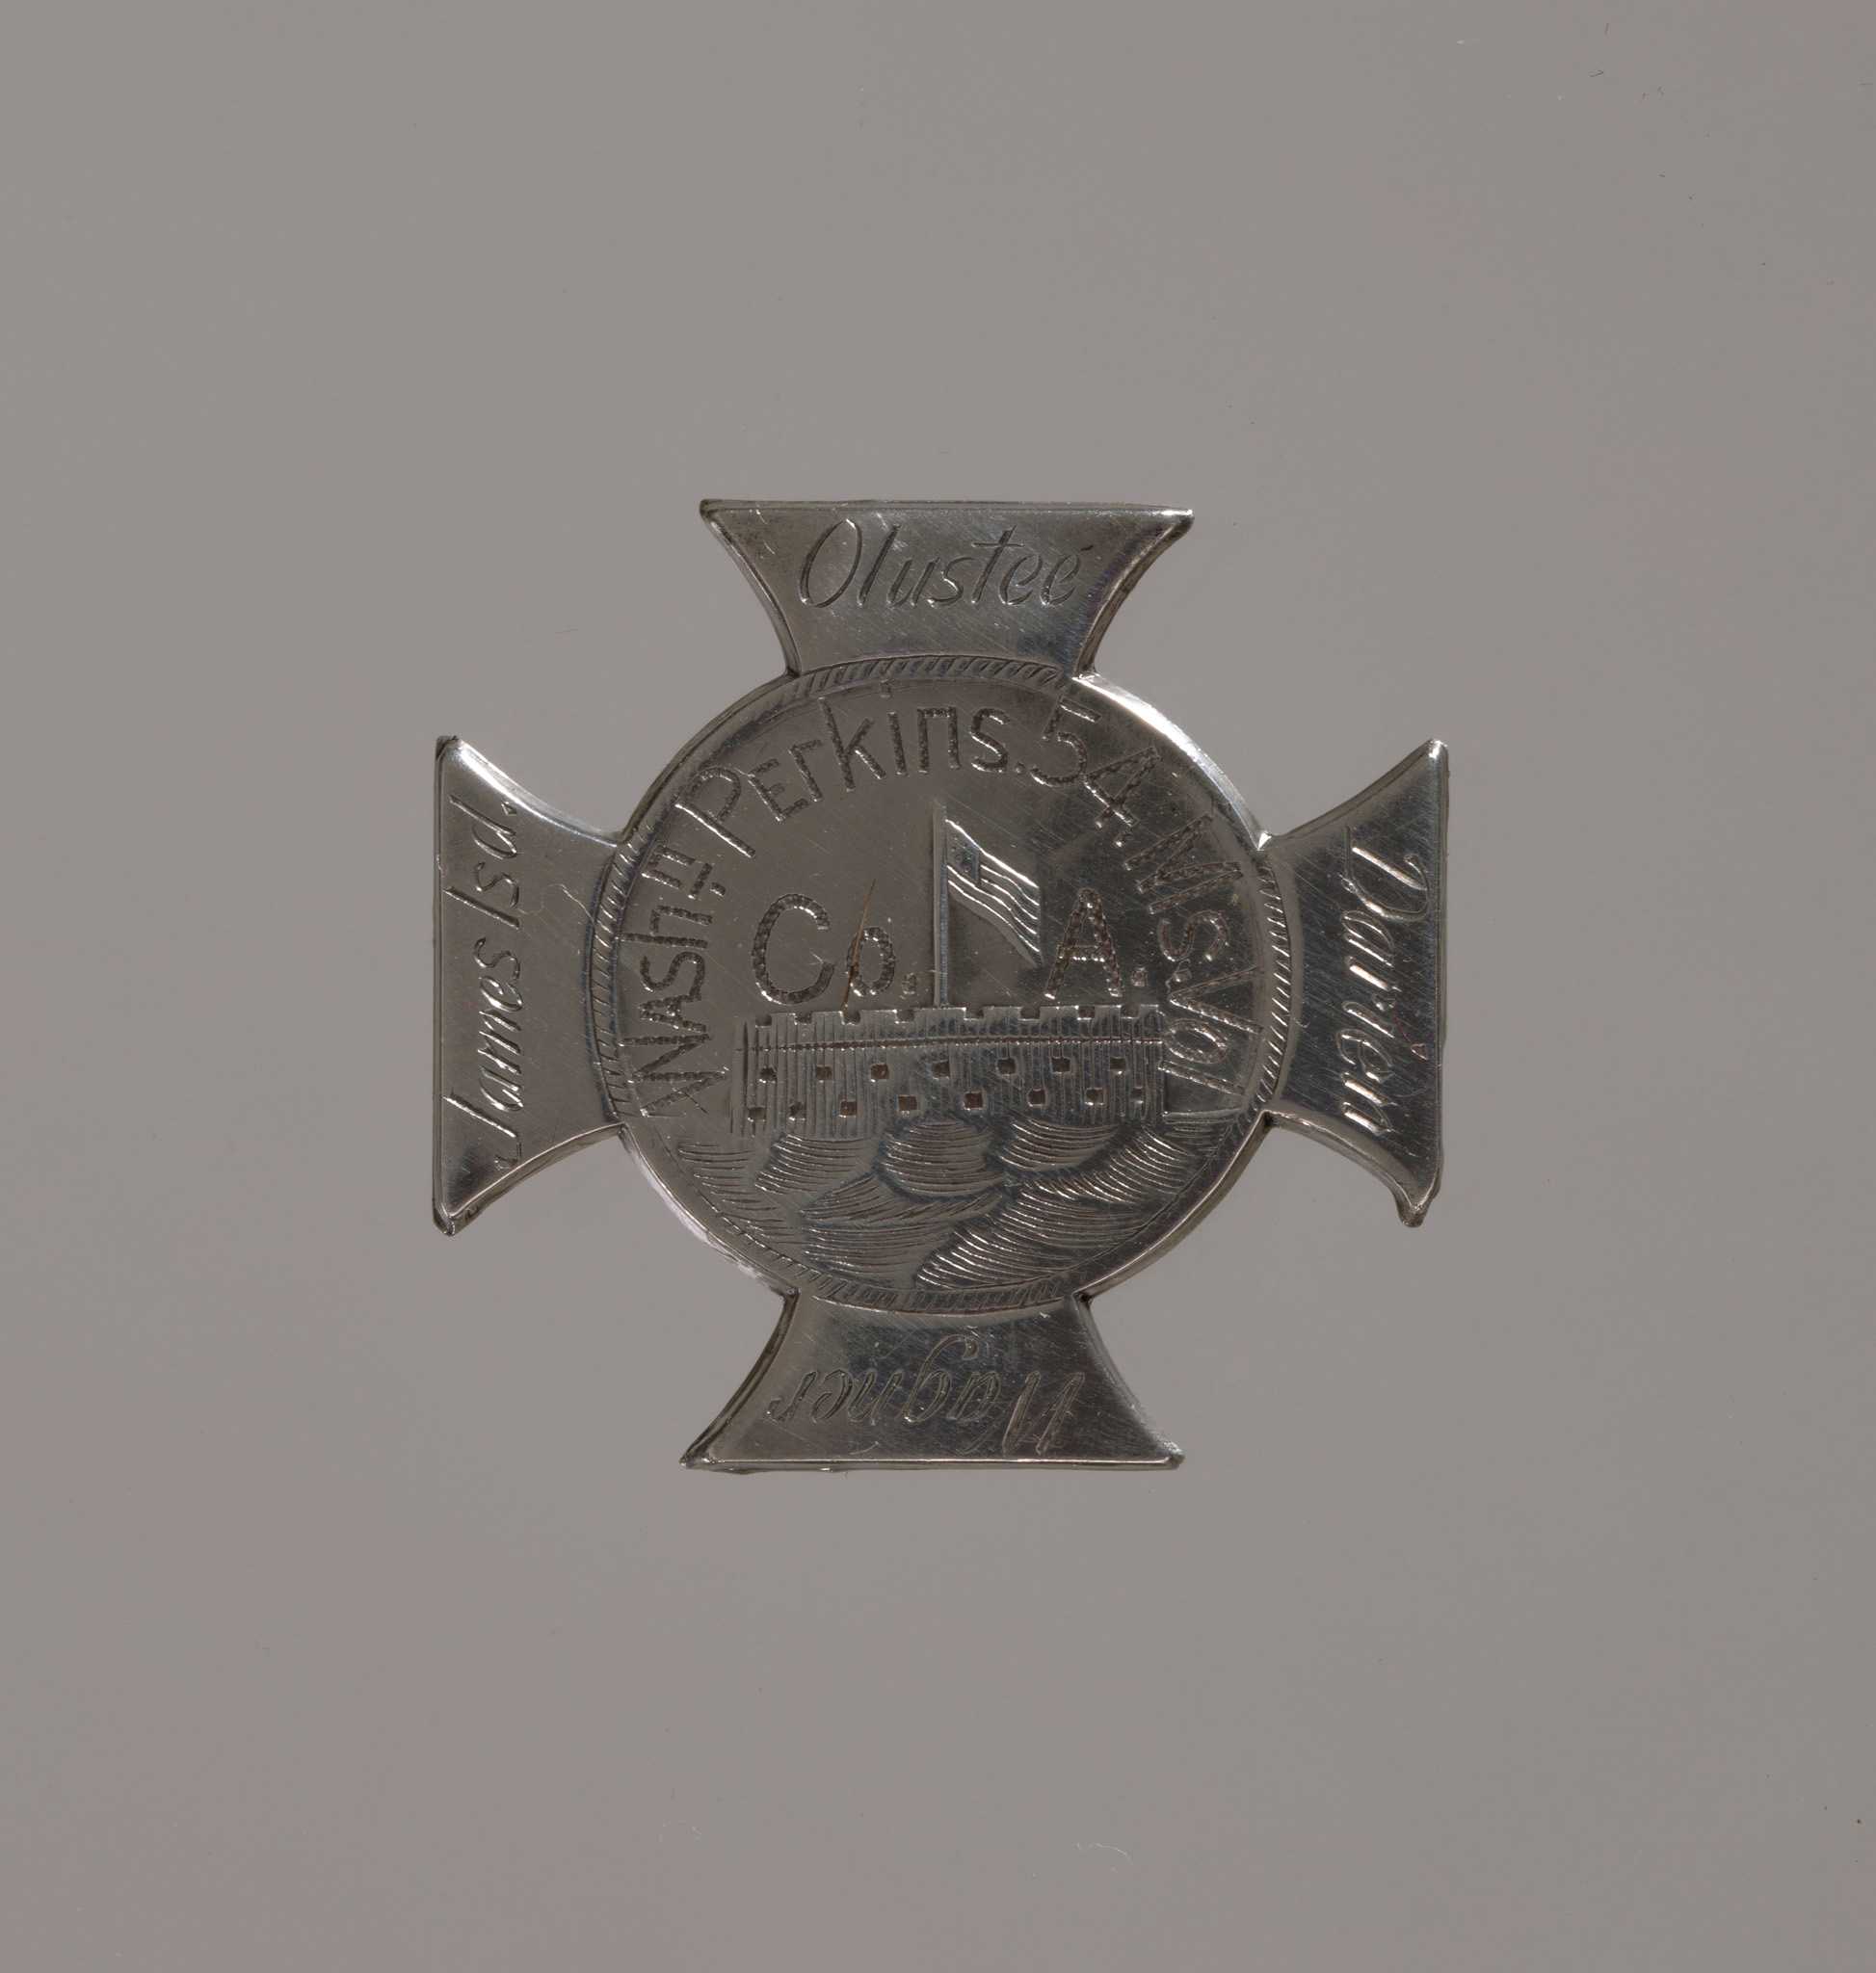 A Maltese cross with a disk at center showing Fort Sumter flying an American flag overhead in raised relief with water in the foreground. The owner’s name [Washnt Perkins 54 Ms. Vol / Co. A] is centered over the fort etched in a half-circle. Each of the arms of the cross is hand engraved with a battle fought by the 54th Massachusetts Infantry — (clockwise from top) Olustee, Darien, Wagner, and James Isd — done in different lettering than the owner’s name. The back of the badge has a T-bar pin closure.